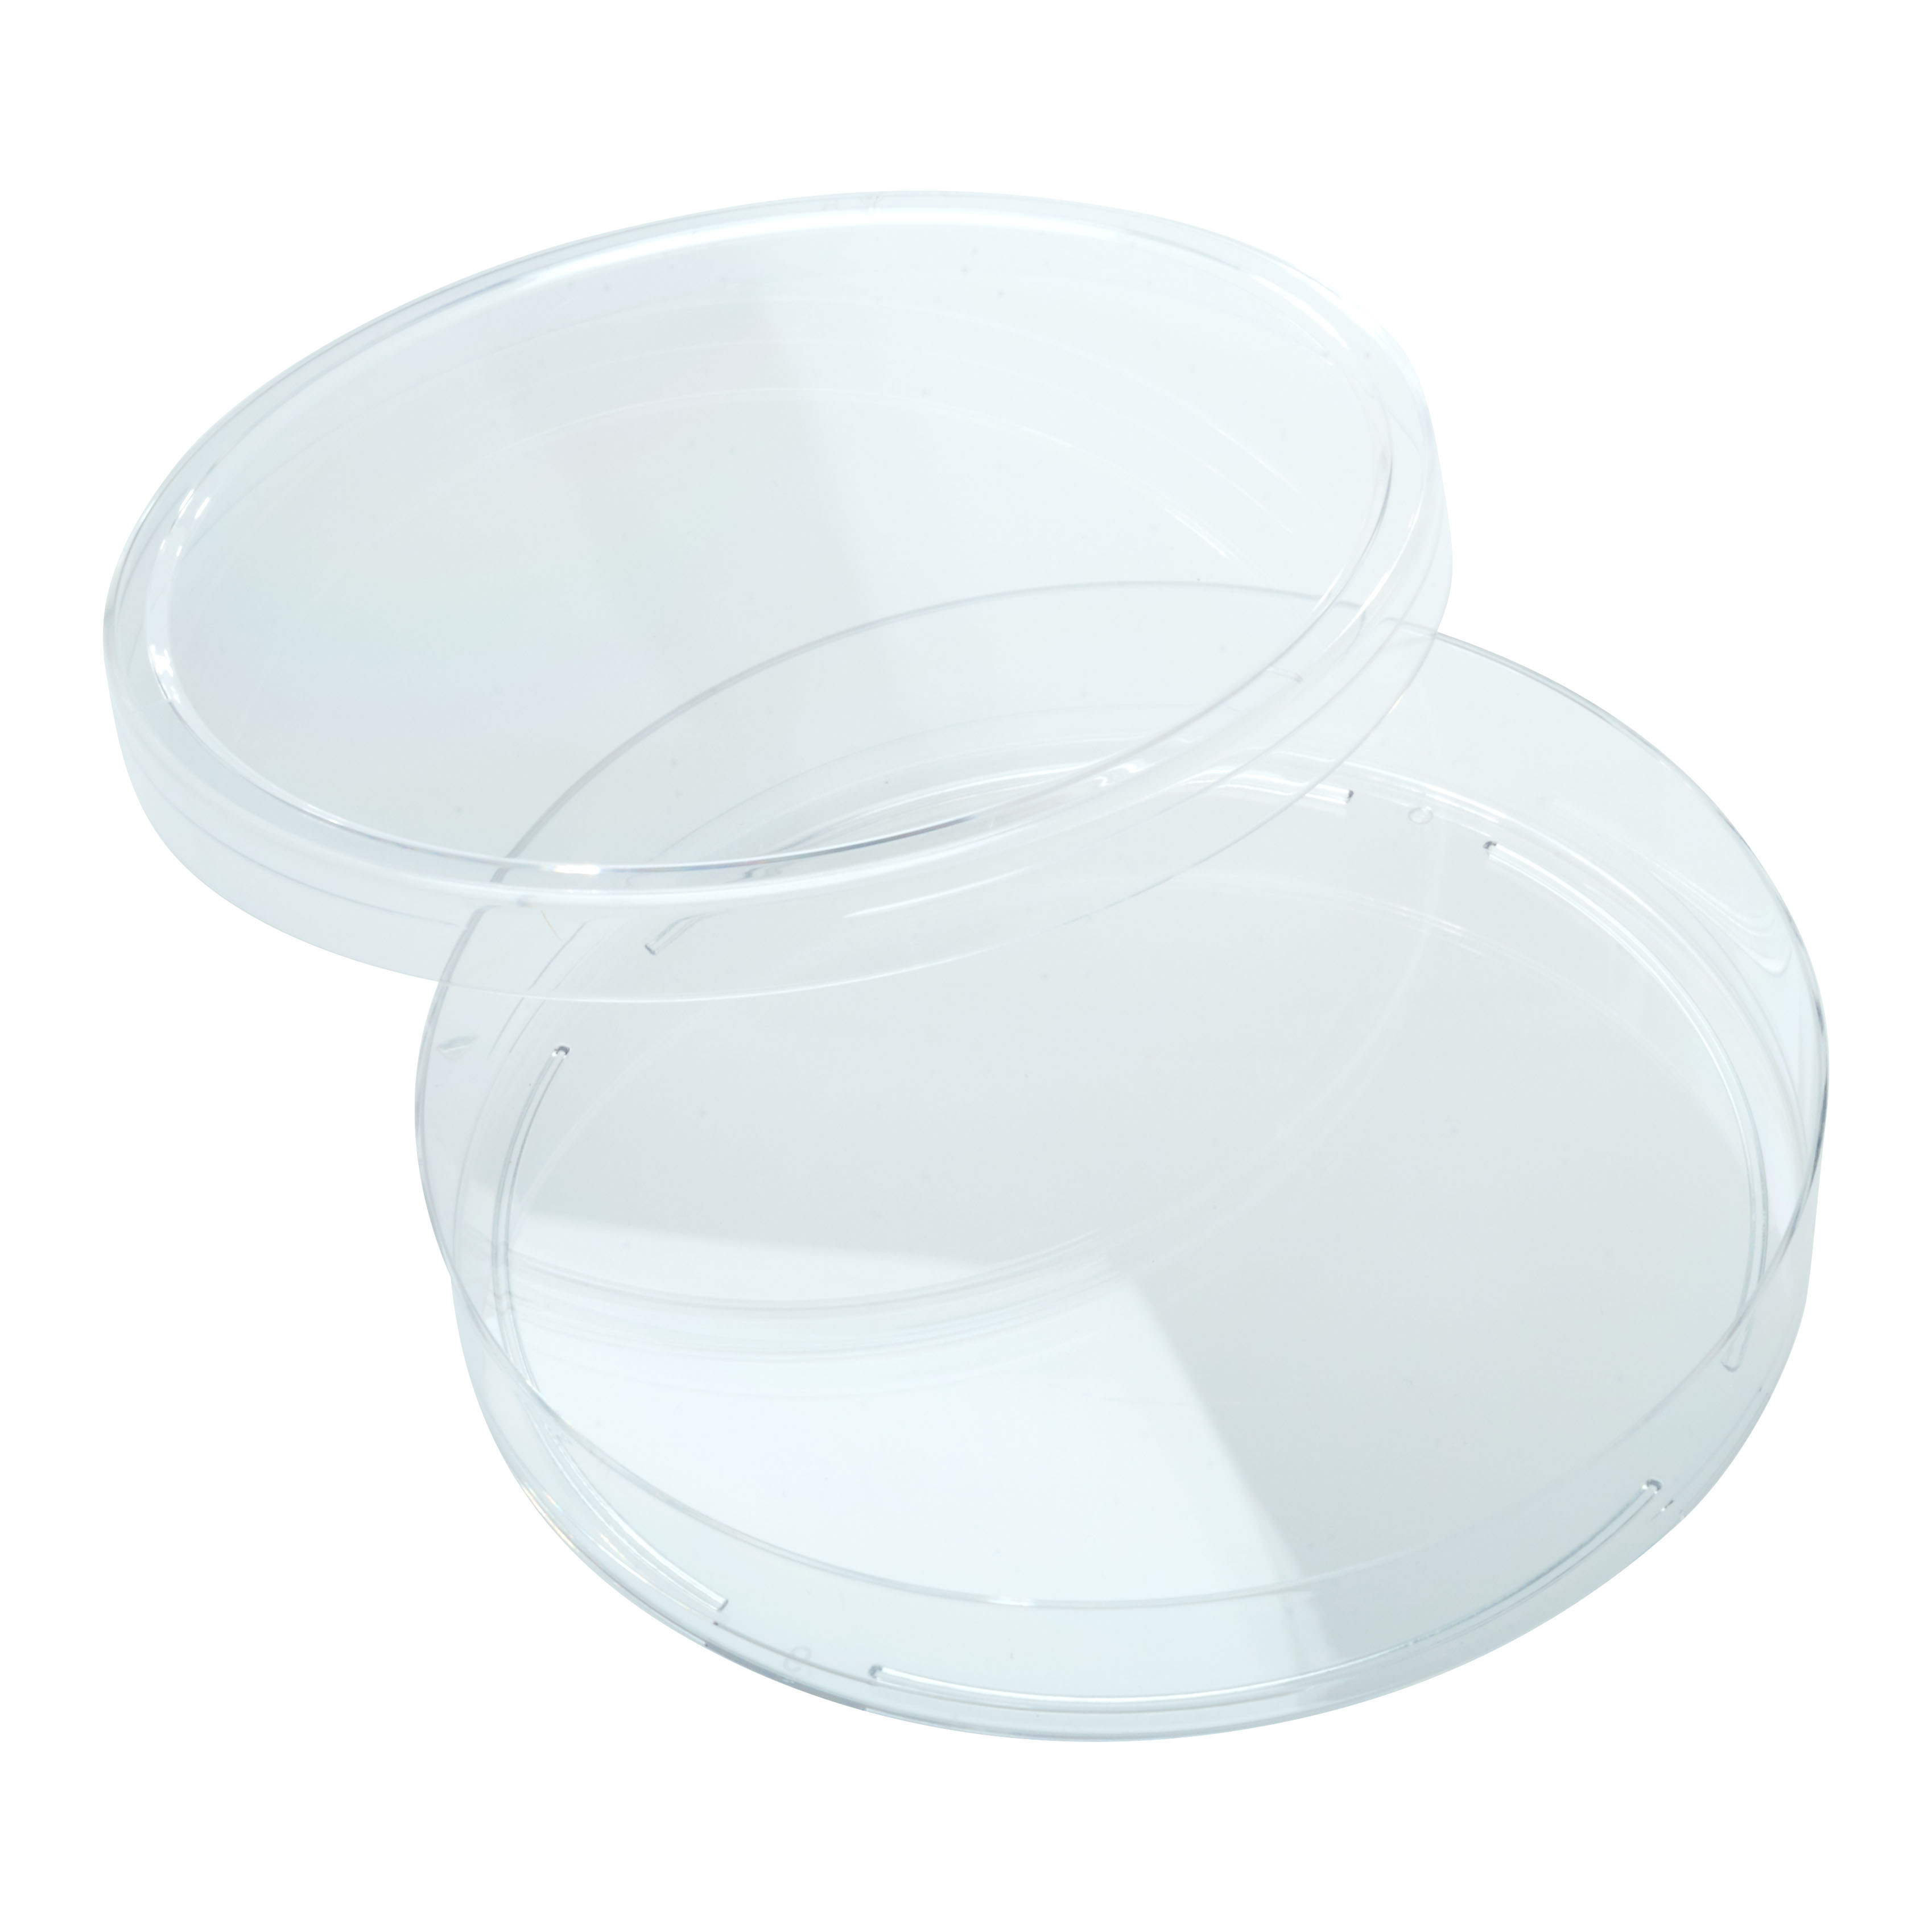 Petri Dishes Stainless Steel 100x20mm